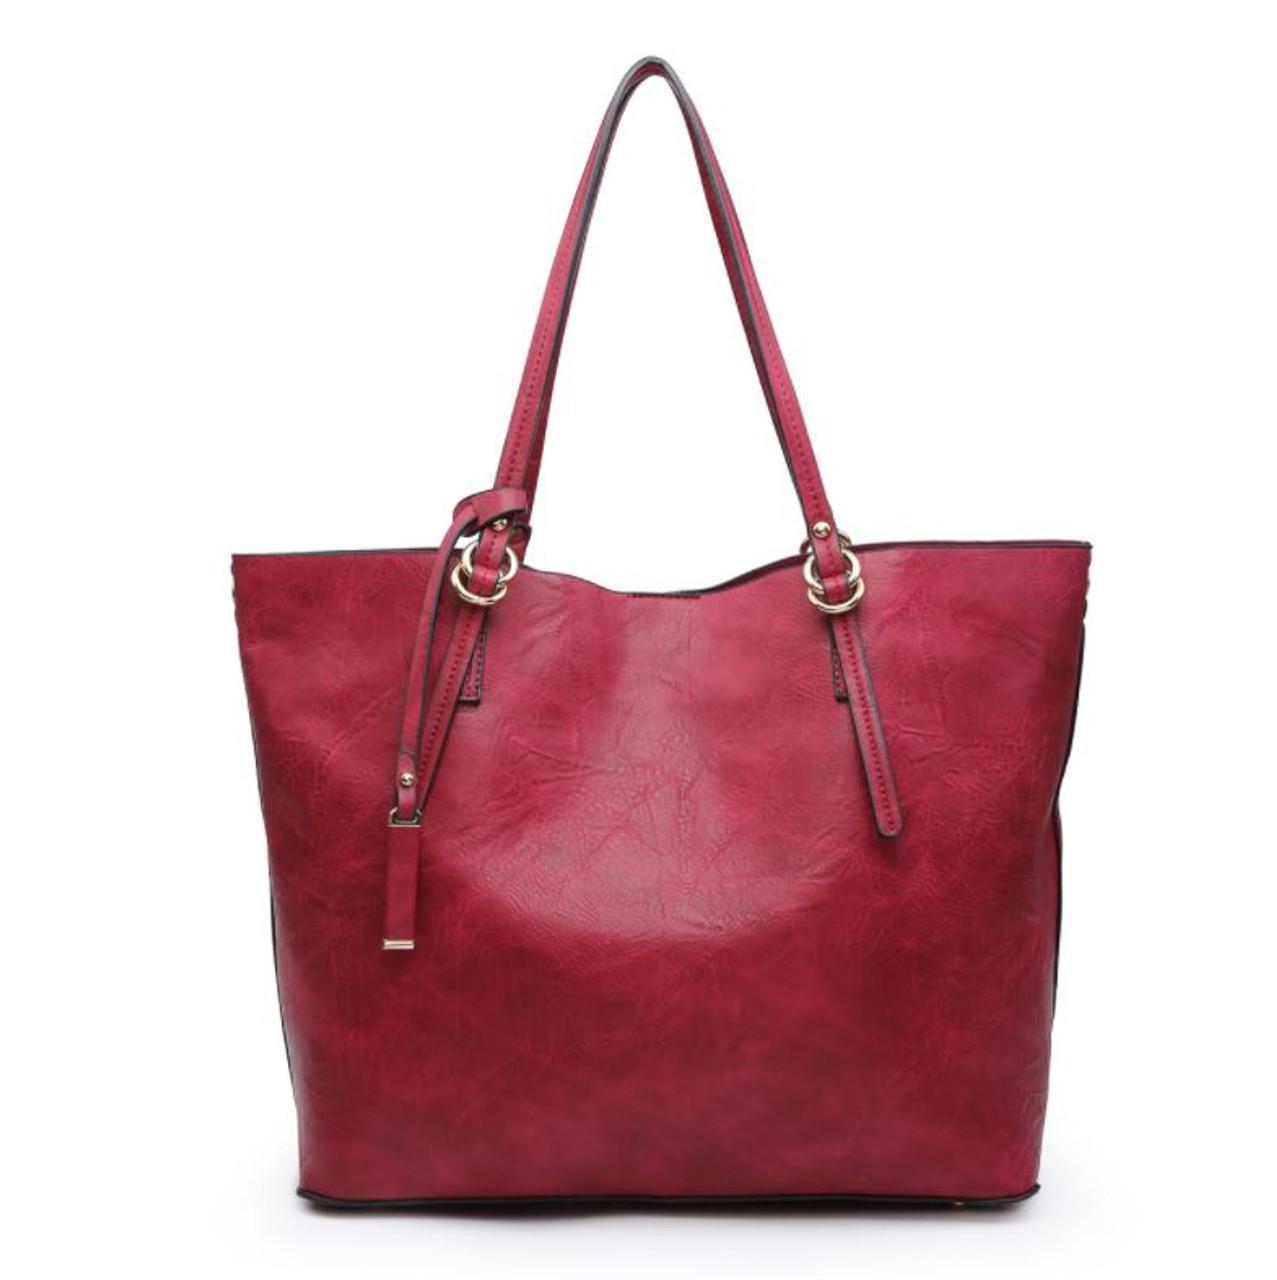 Jen & Co Iris Tote with Matching Bag